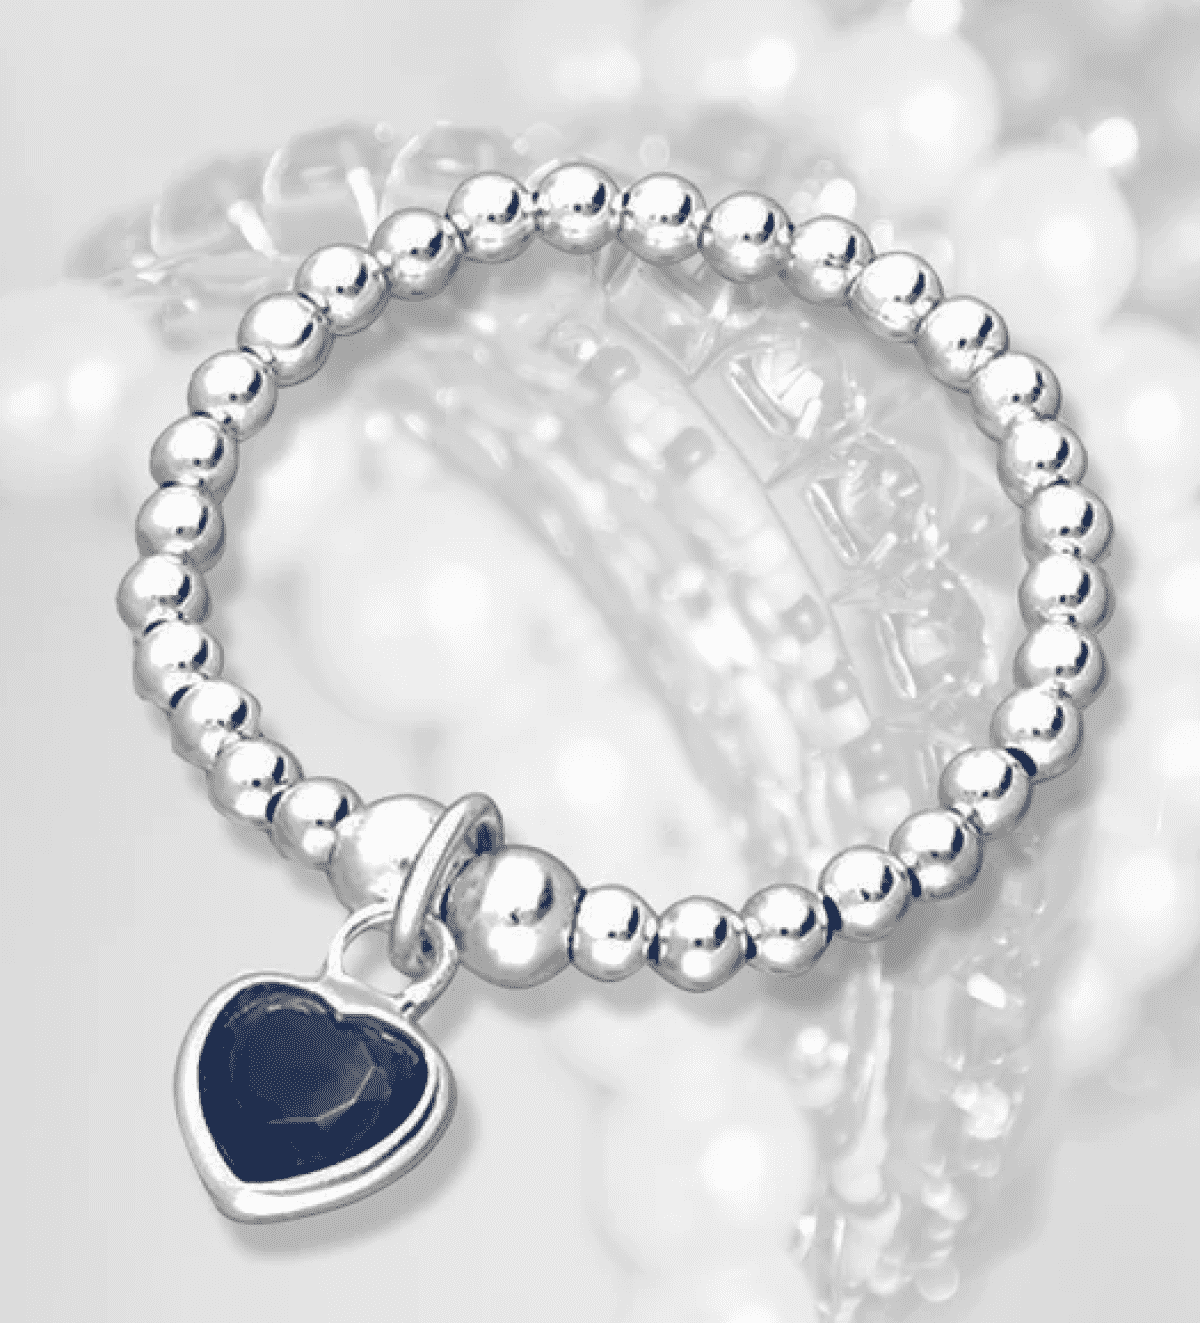 Adorable and Durable: Why Child's Sterling Silver Bracelets Make the Perfect Gift for Your Little One